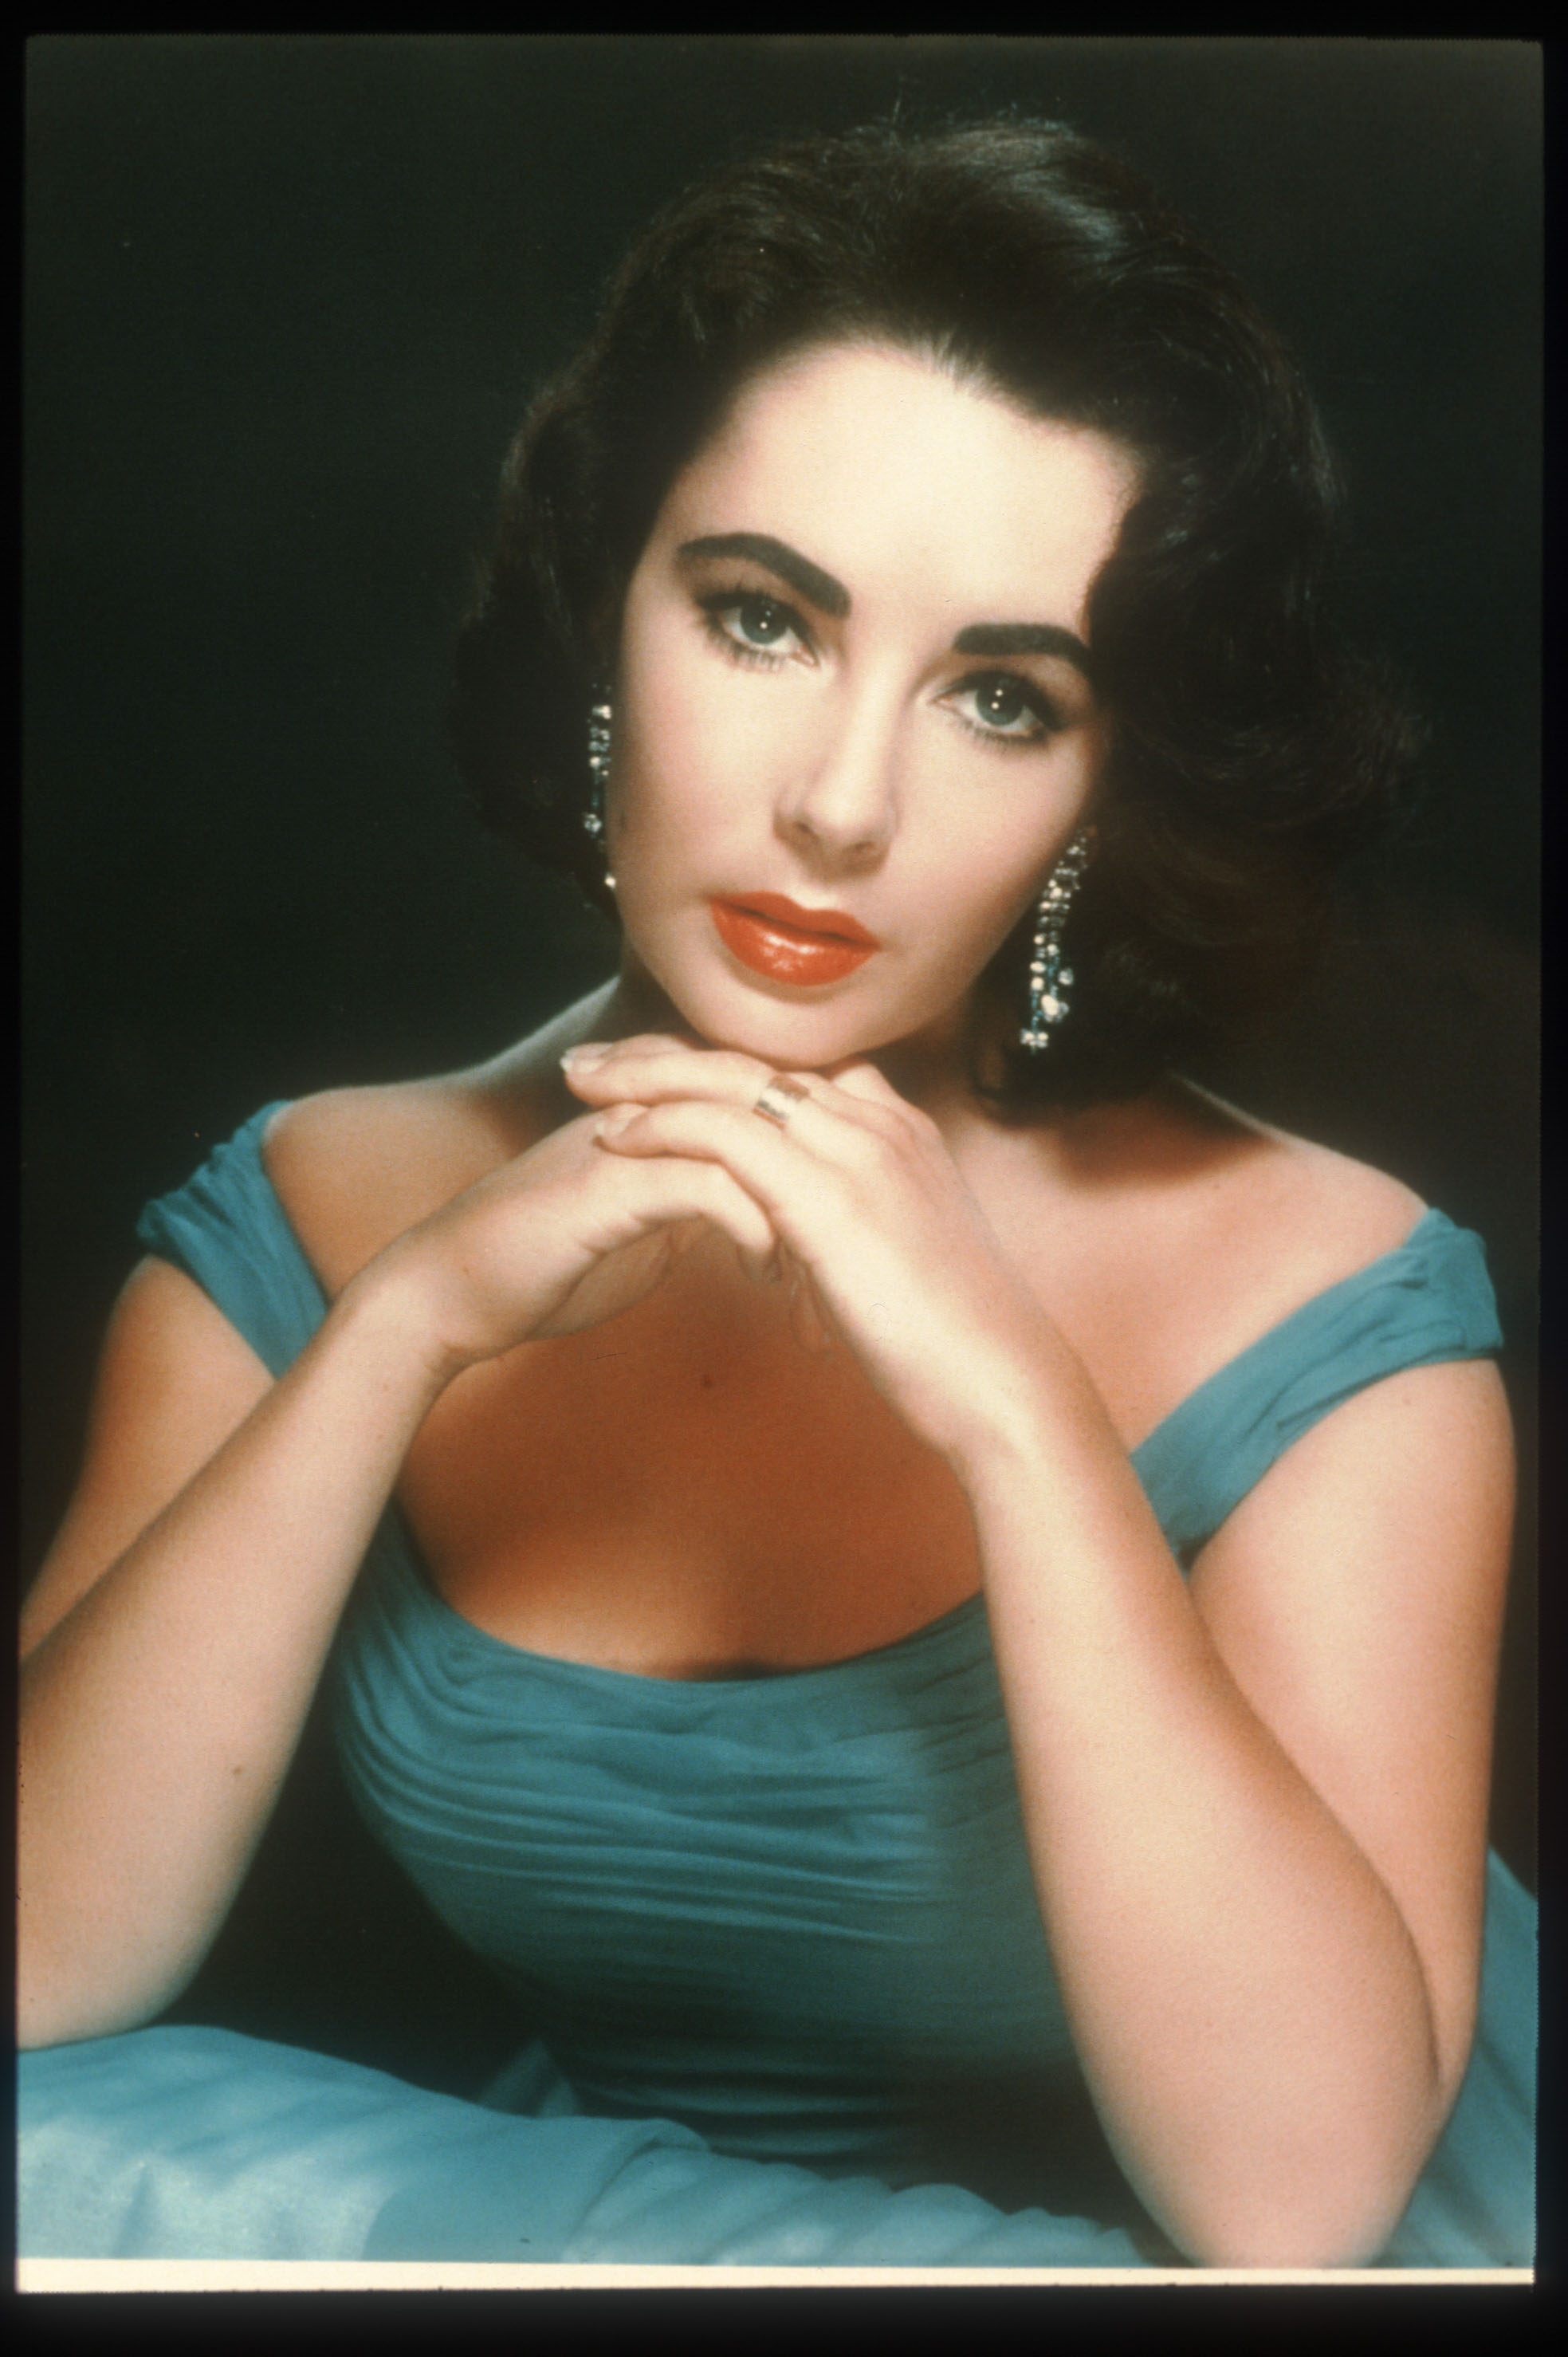 Photo of Elizabeth Taylor in 1960. | Source: Getty Images